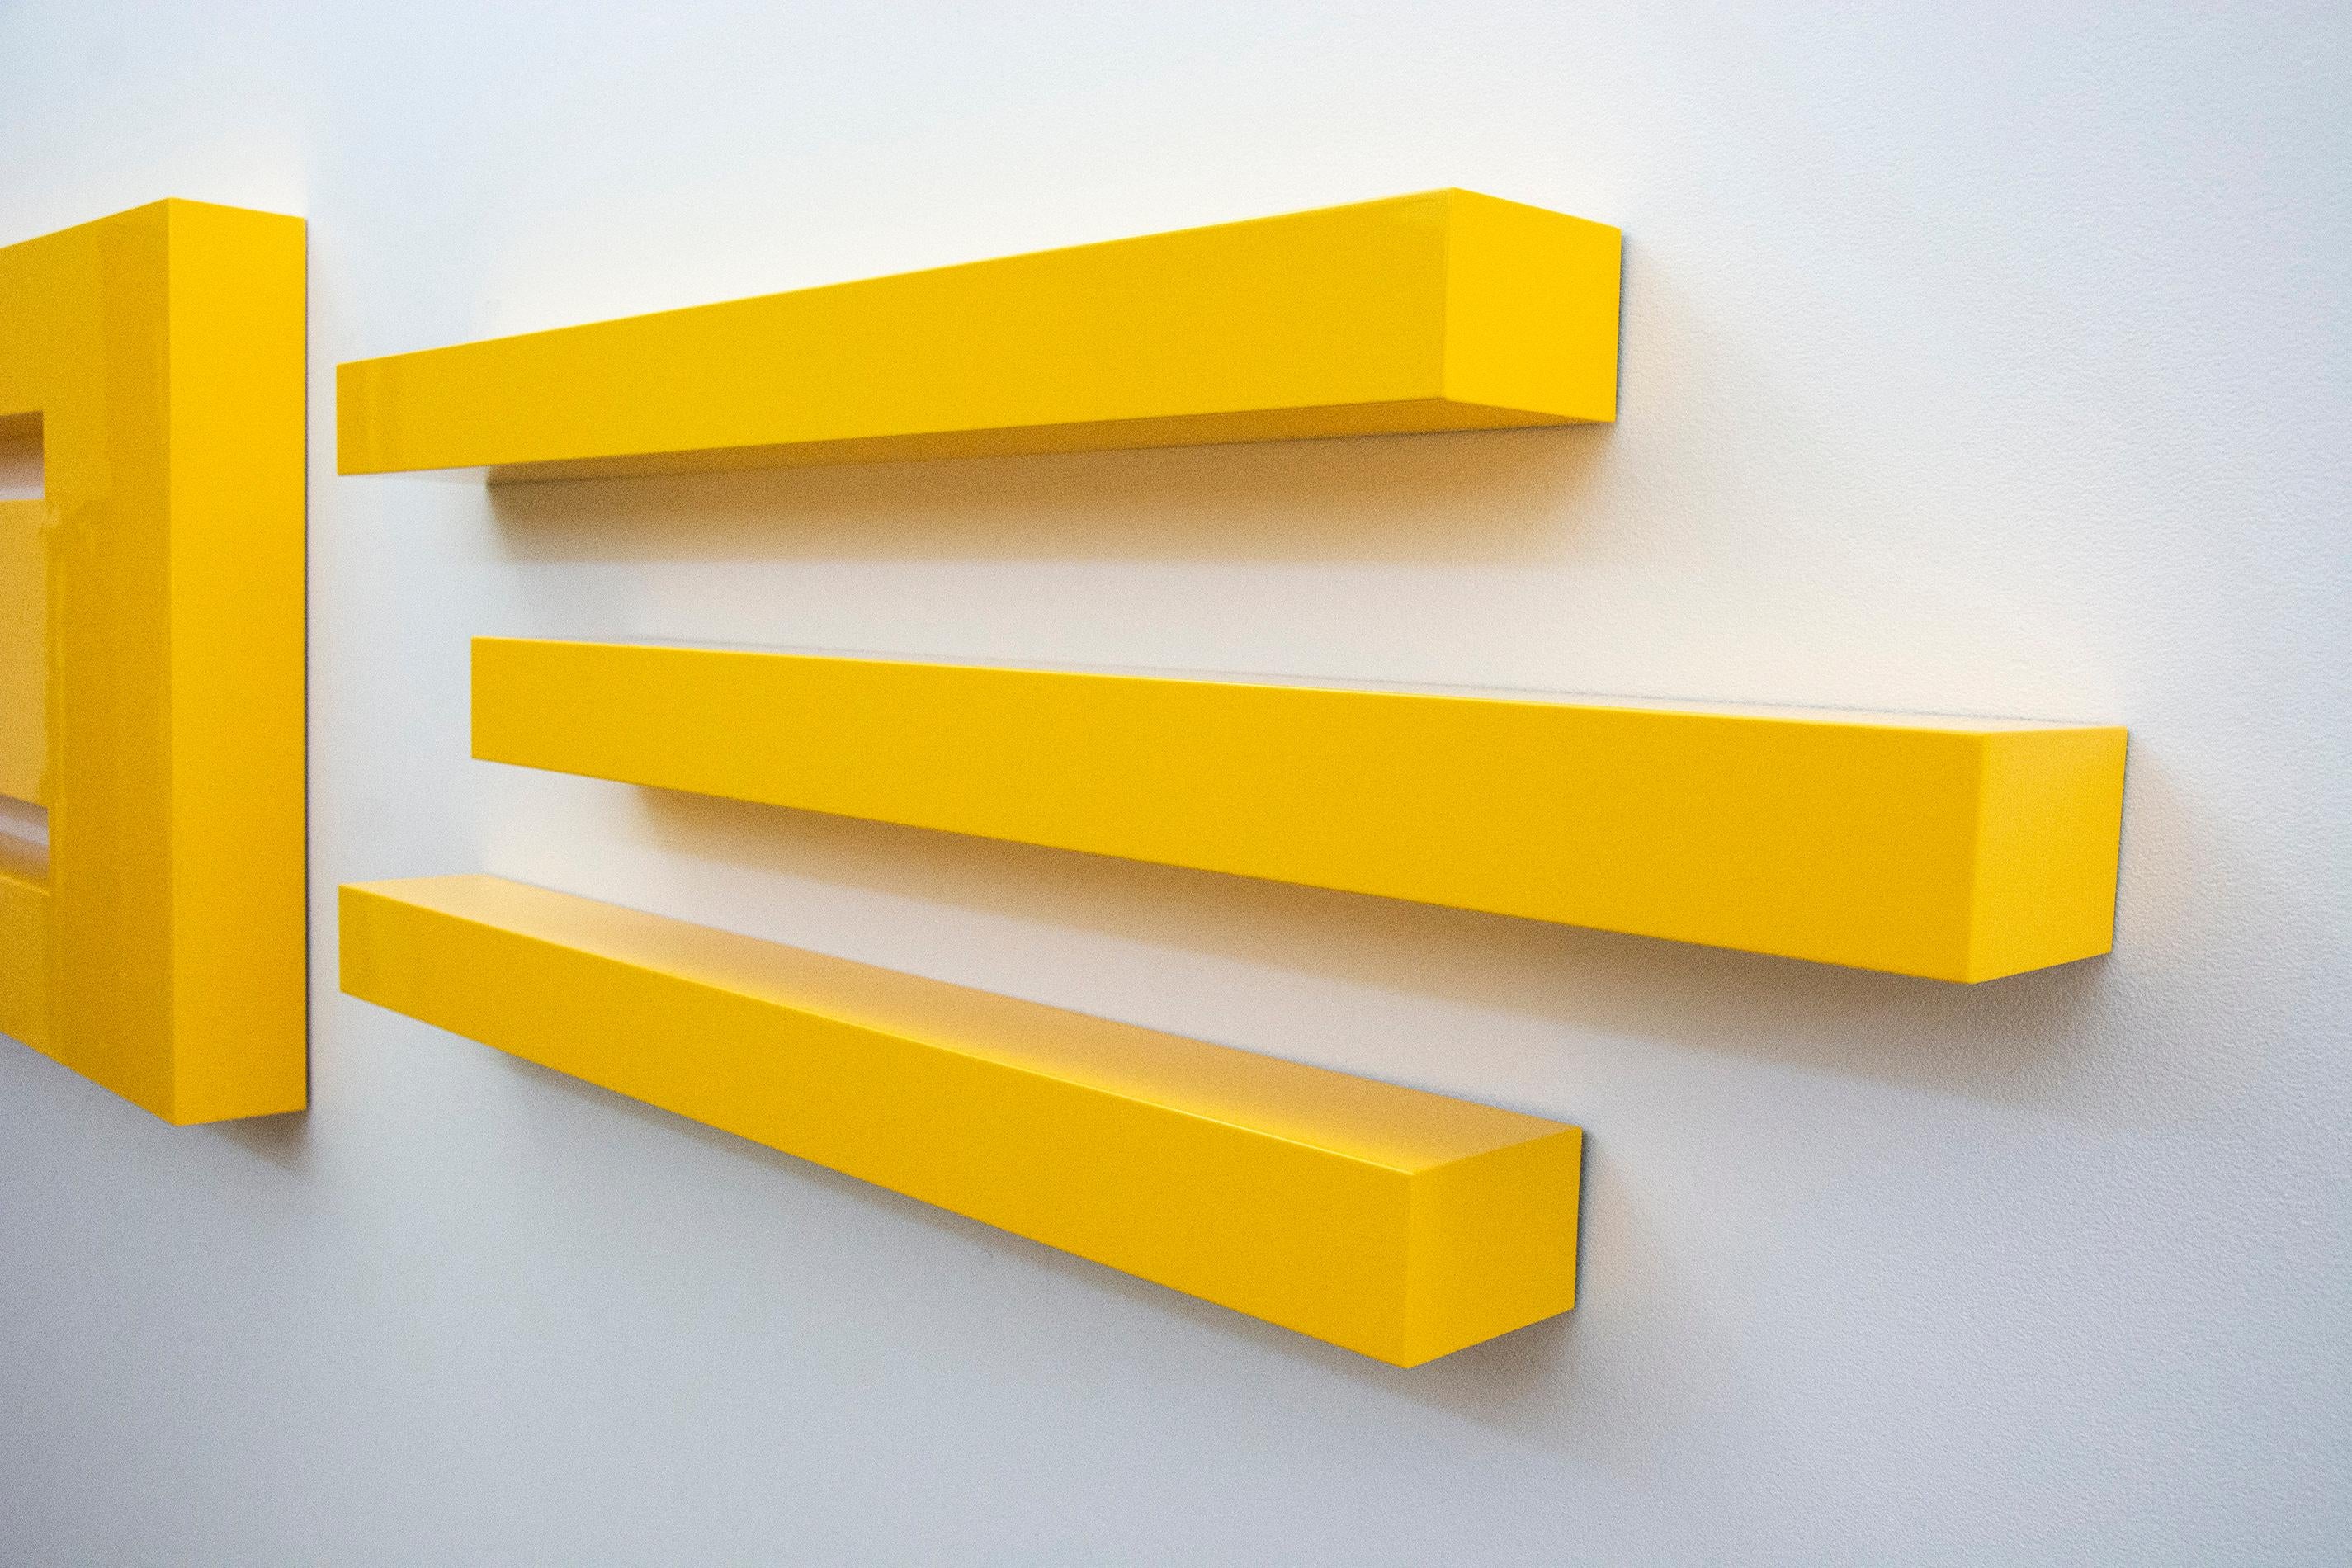 Foundations, Yellow - large, smooth, bright, glossy, abstract wall sculpture - Contemporary Sculpture by  Lori Cozen-Geller